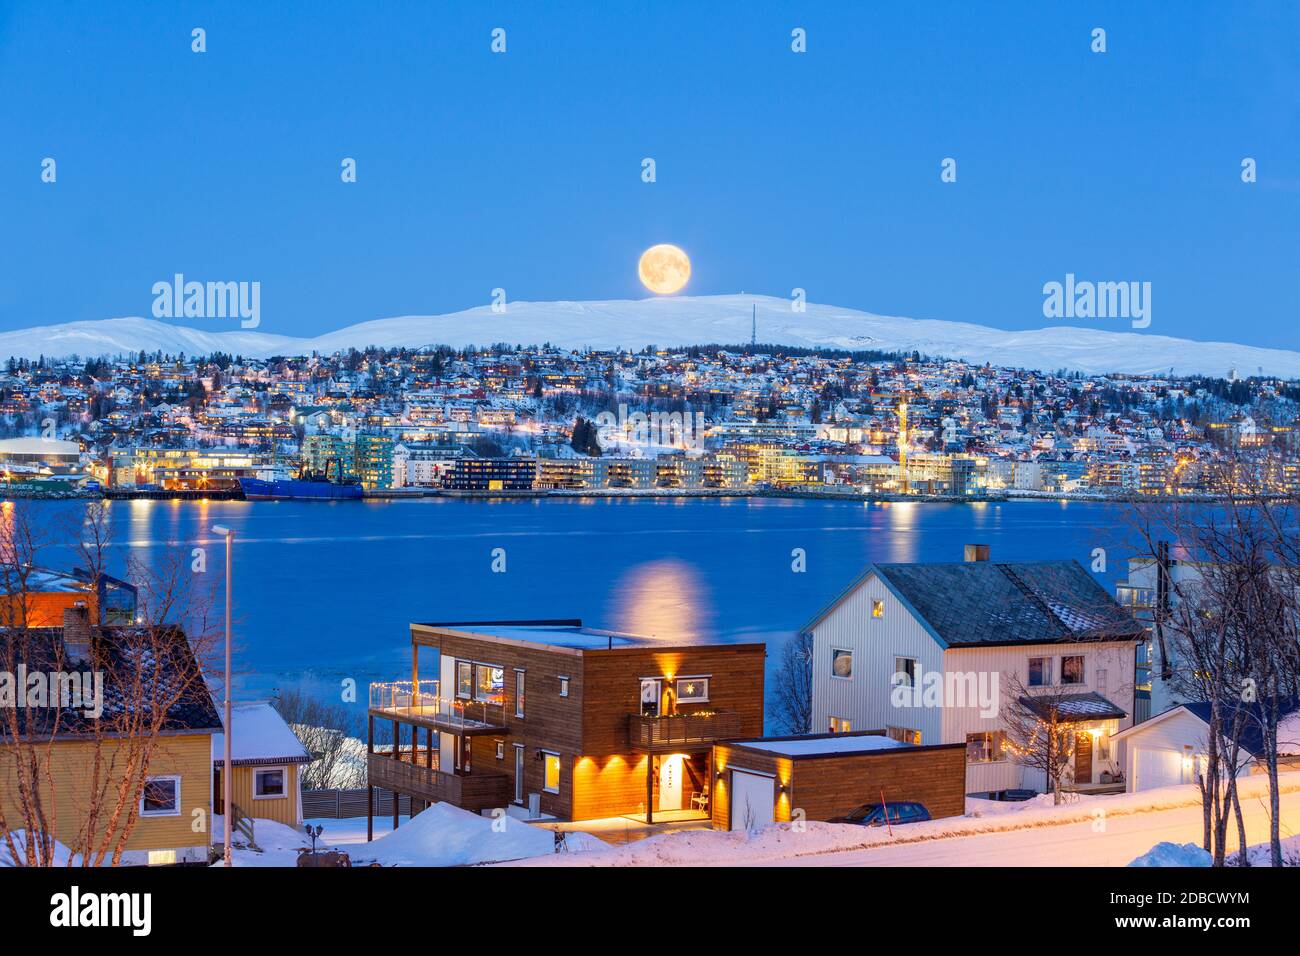 Tromso City At Full Moon In Winter Time, Christmas in Tromso, Norway Stock Photo